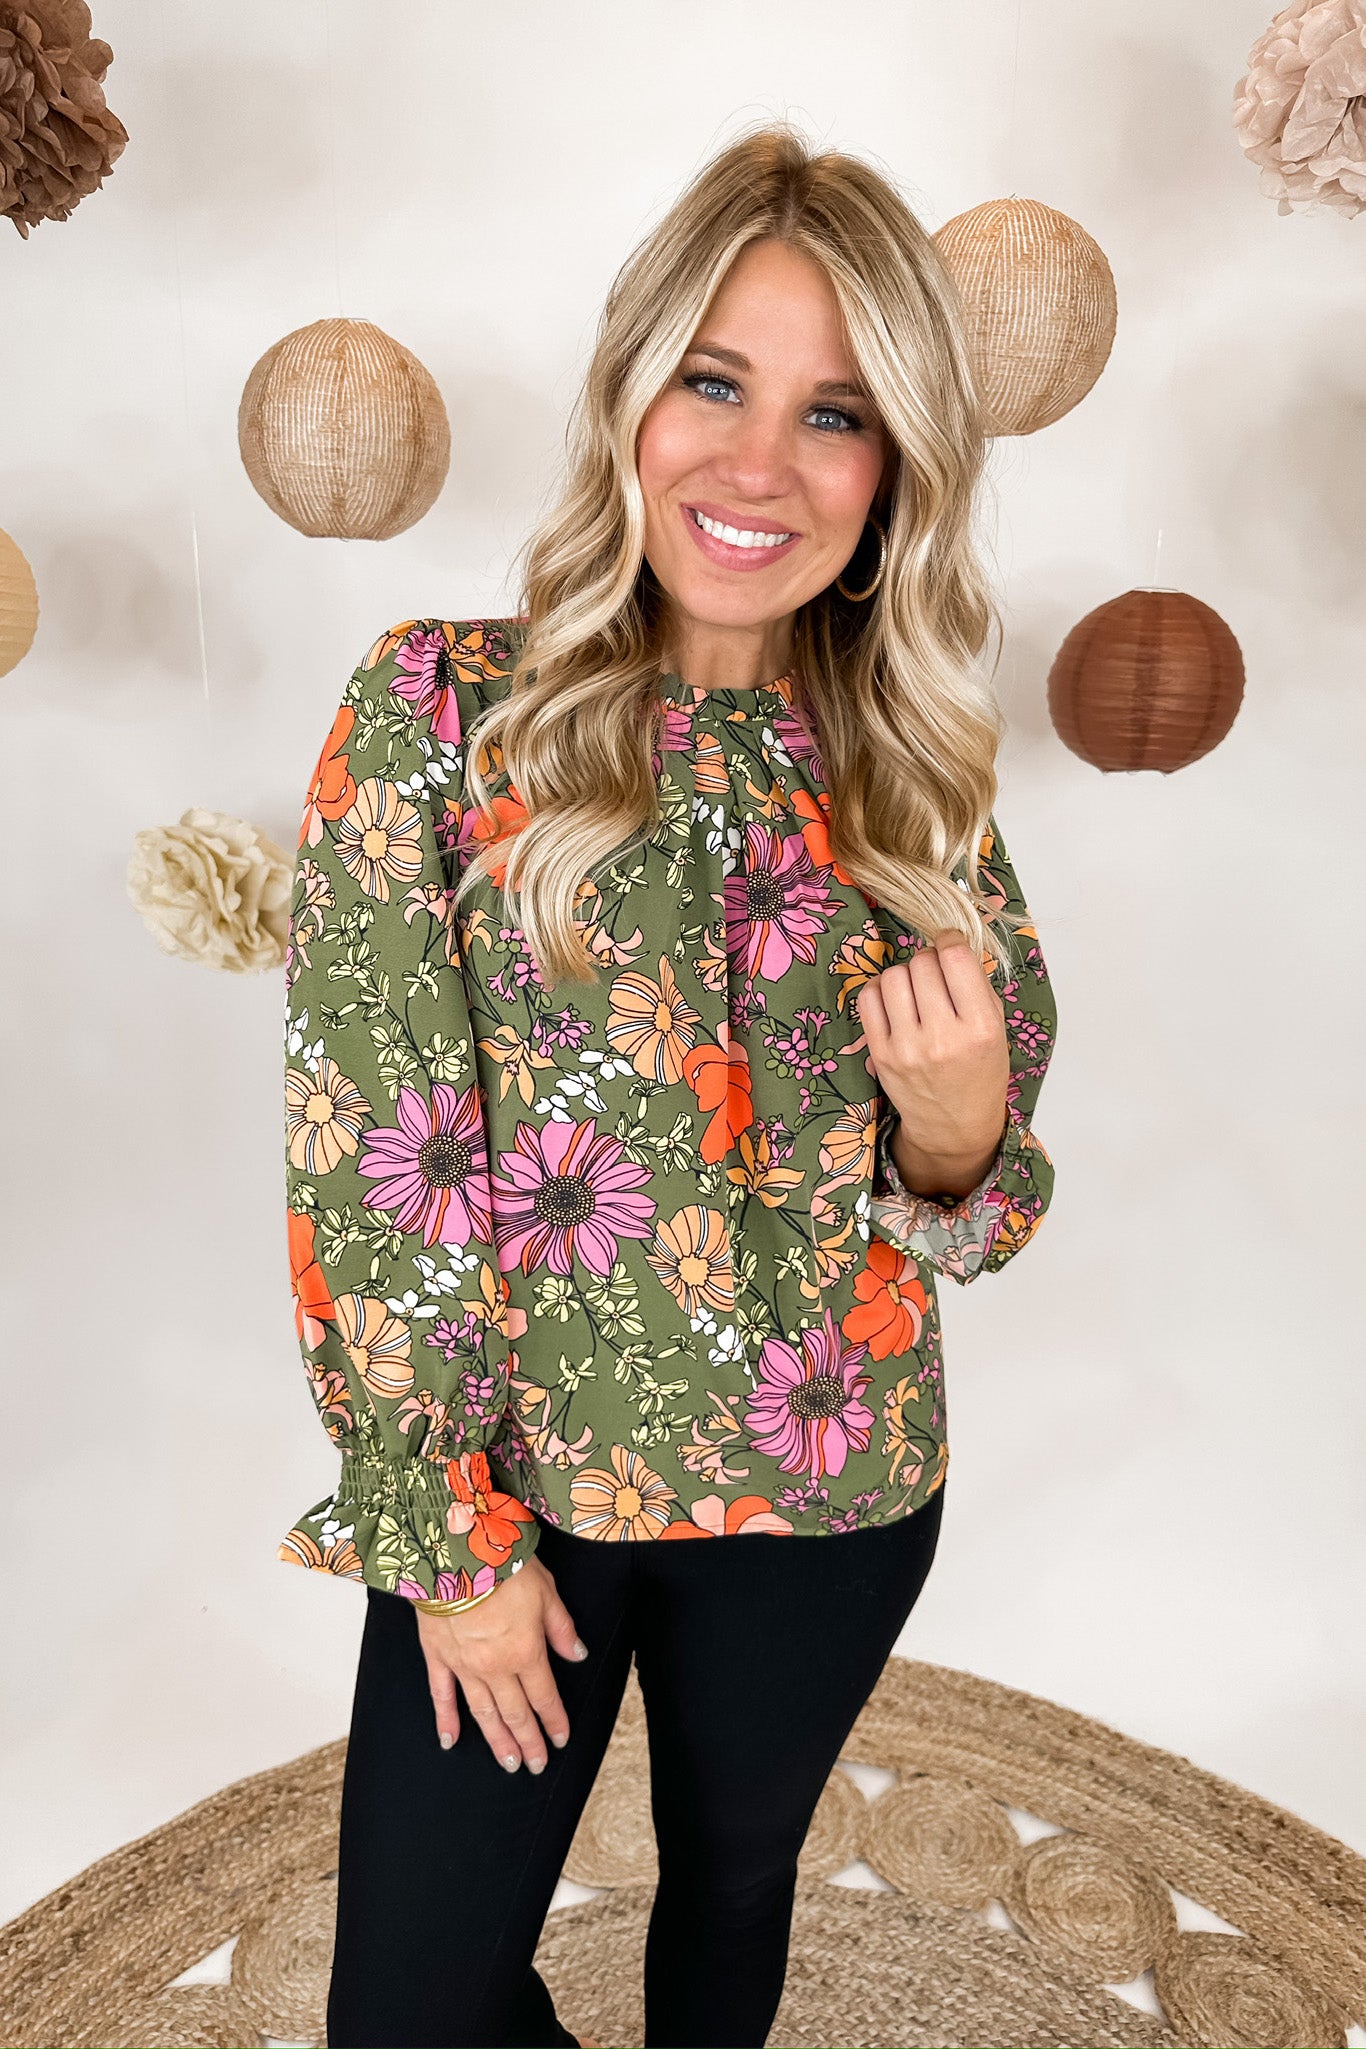 The Quinn Vintage Petals Top by Michelle McDowell